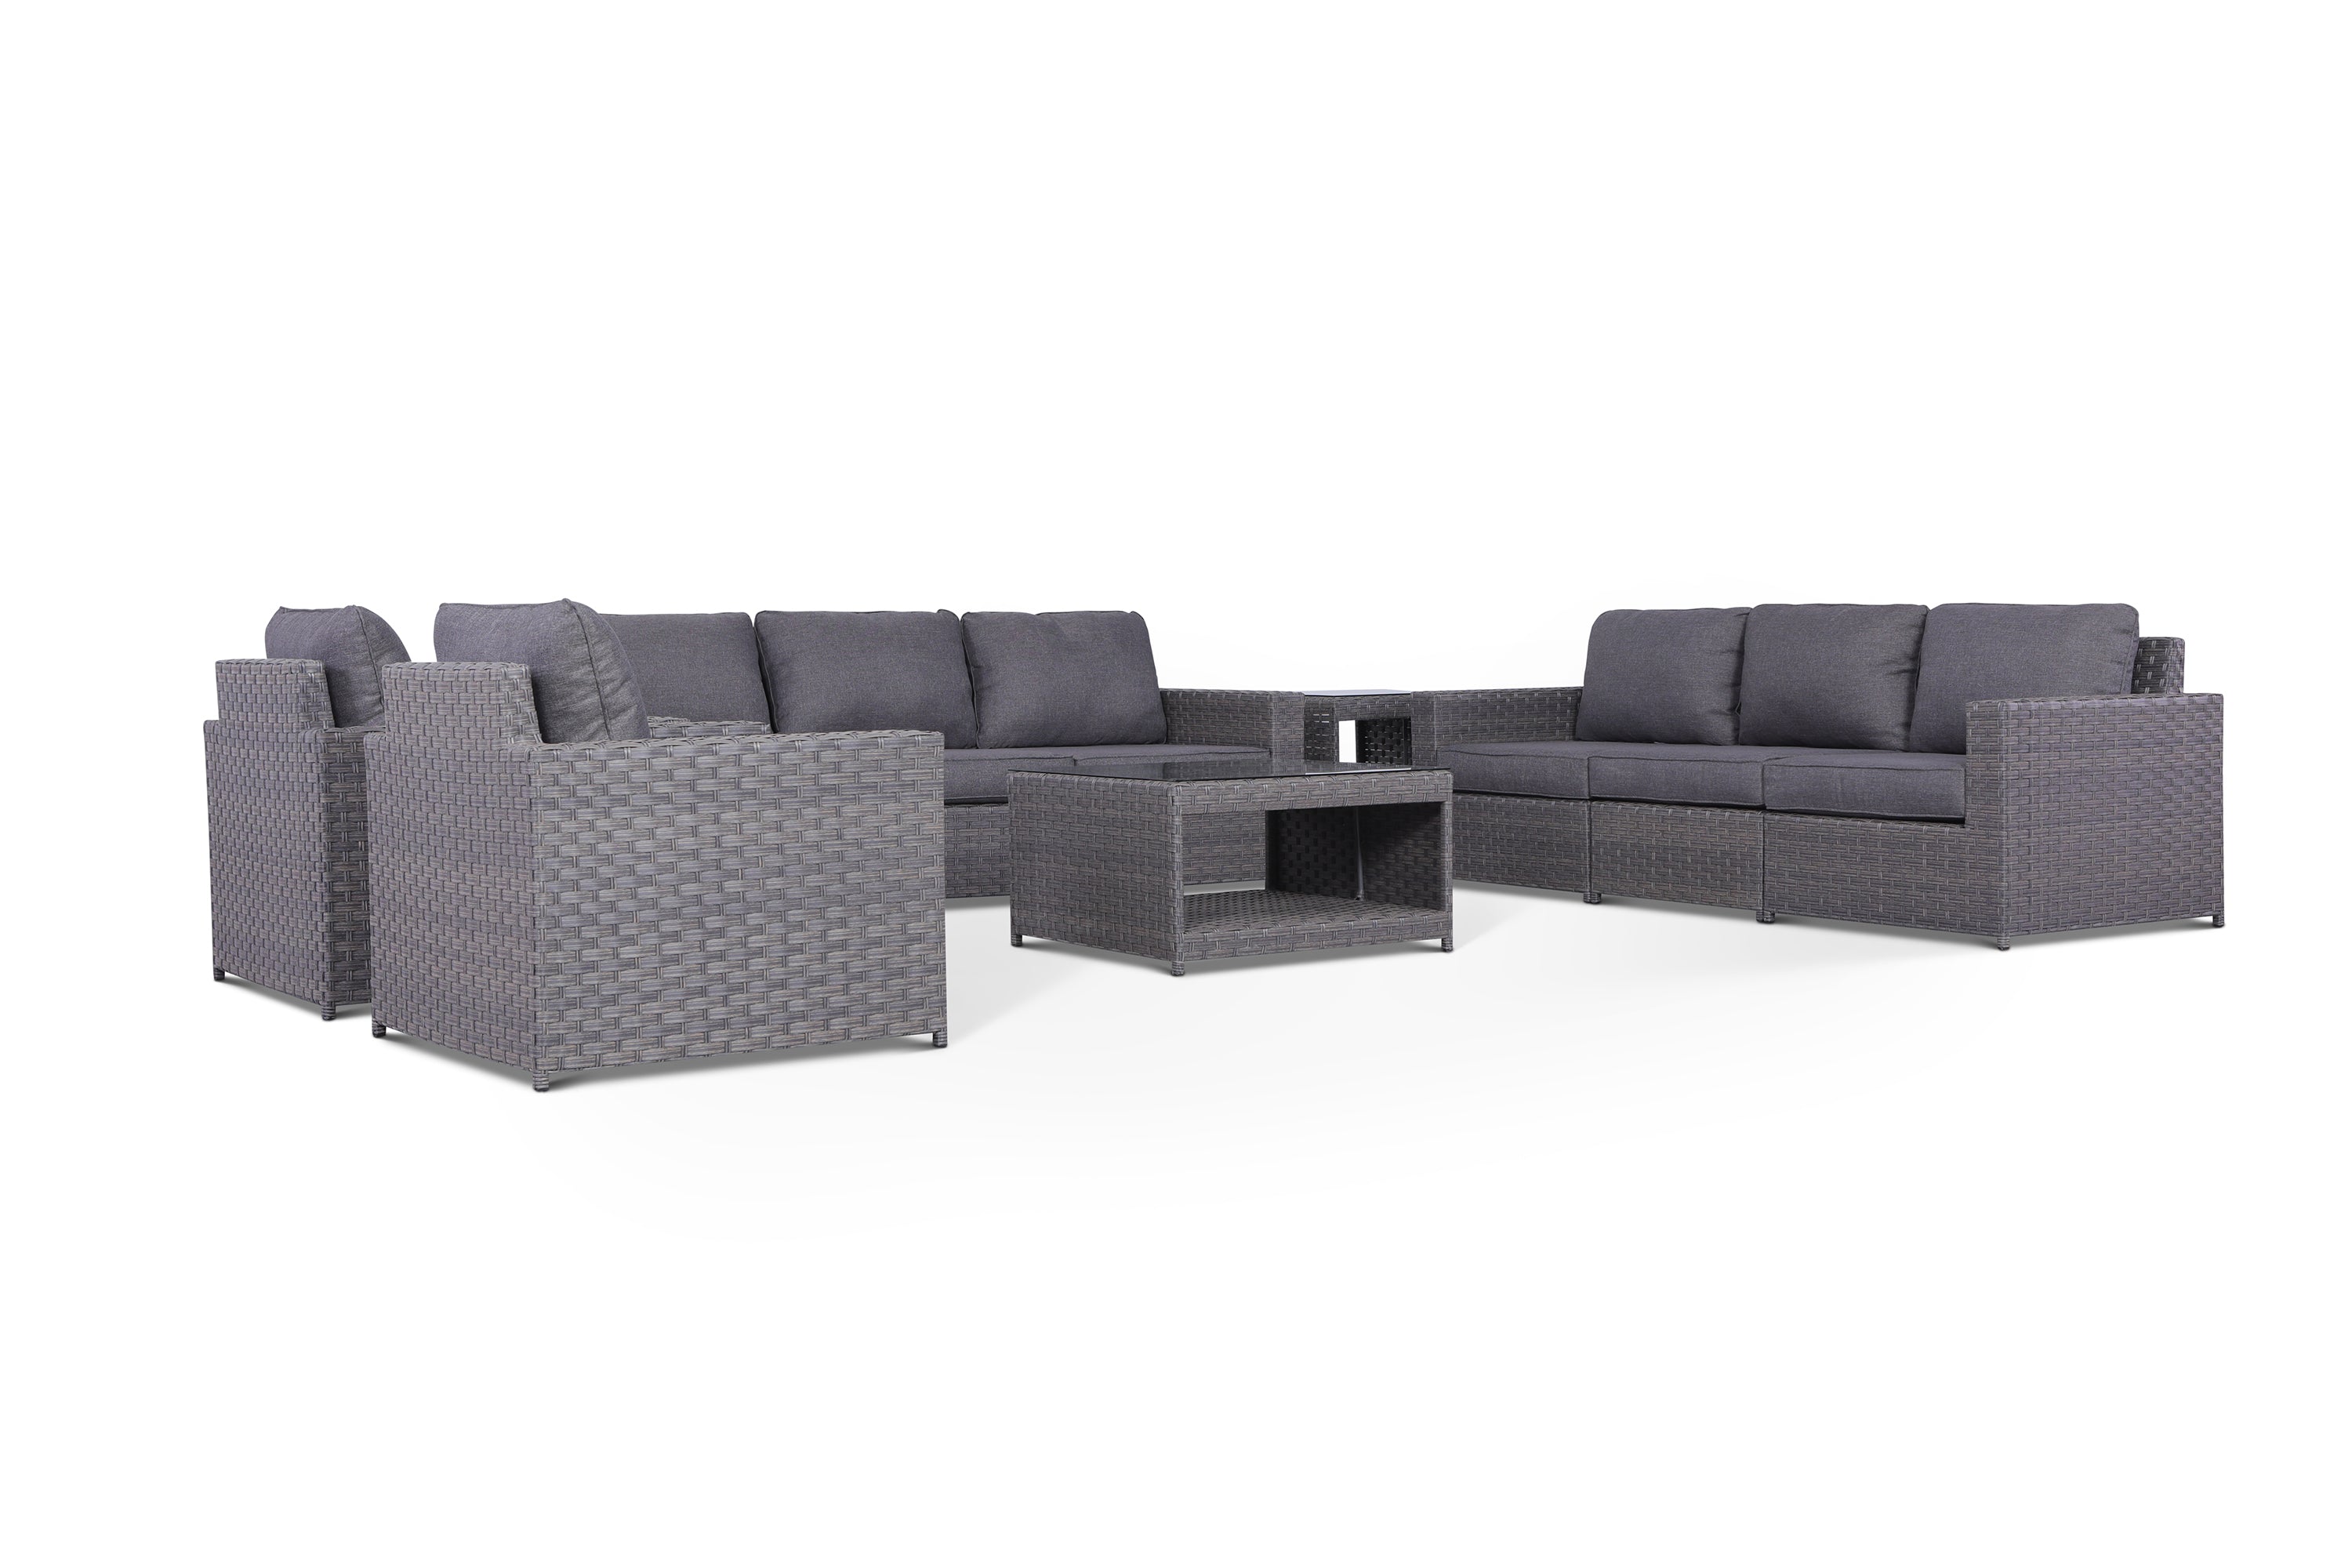 Cromwell 11 Piece Outdoor Conversational Sofa Set with End Tables